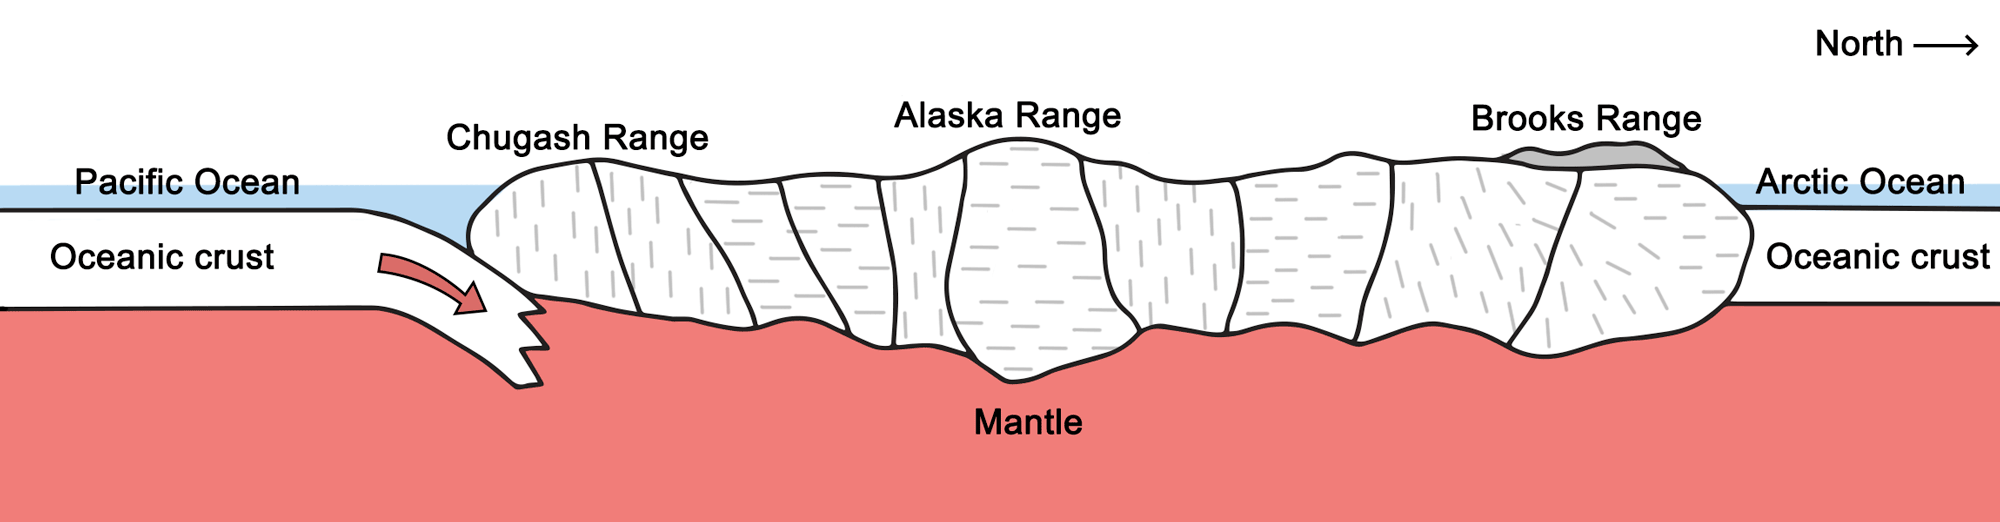 Diagram showing a cross section of Alaska, depicting numerous accreted terranes.